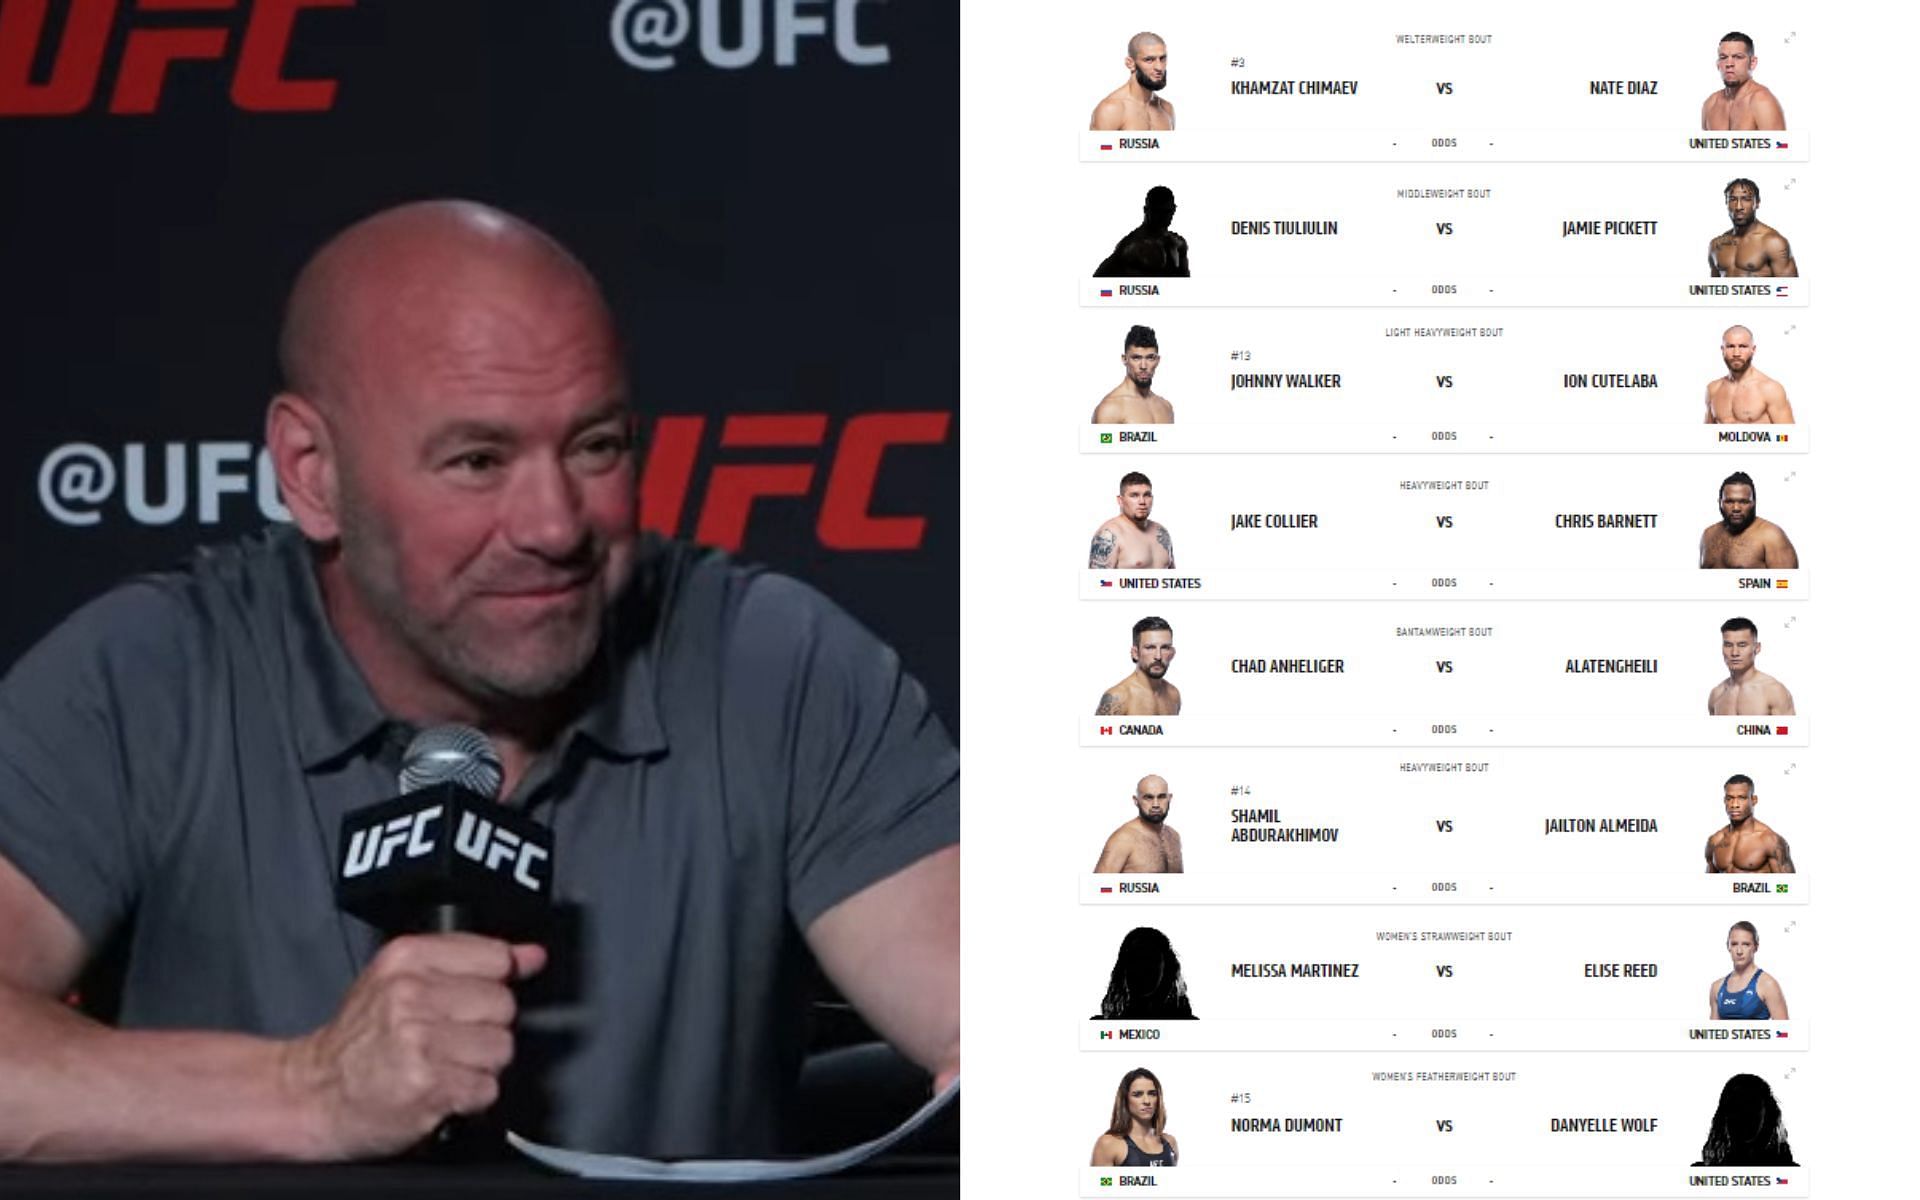 Dana White (L) reveals he will be adding more fights to the UFC 279 card [Credits: UFC/YouTube, UFC.com]